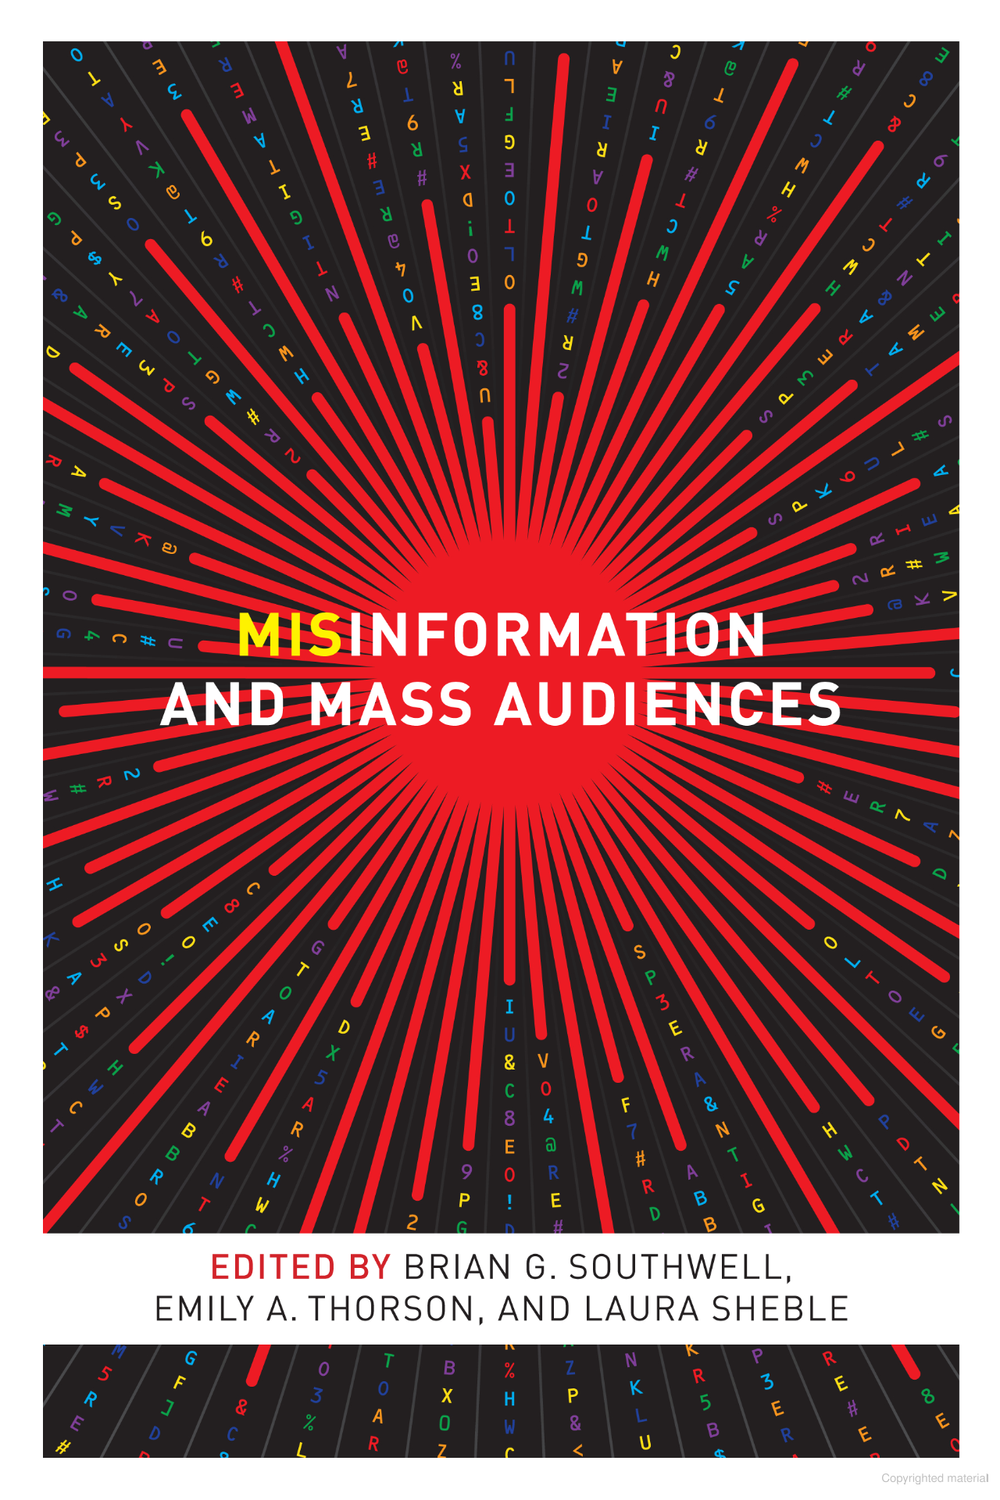 Misinfo and Mass Audiences